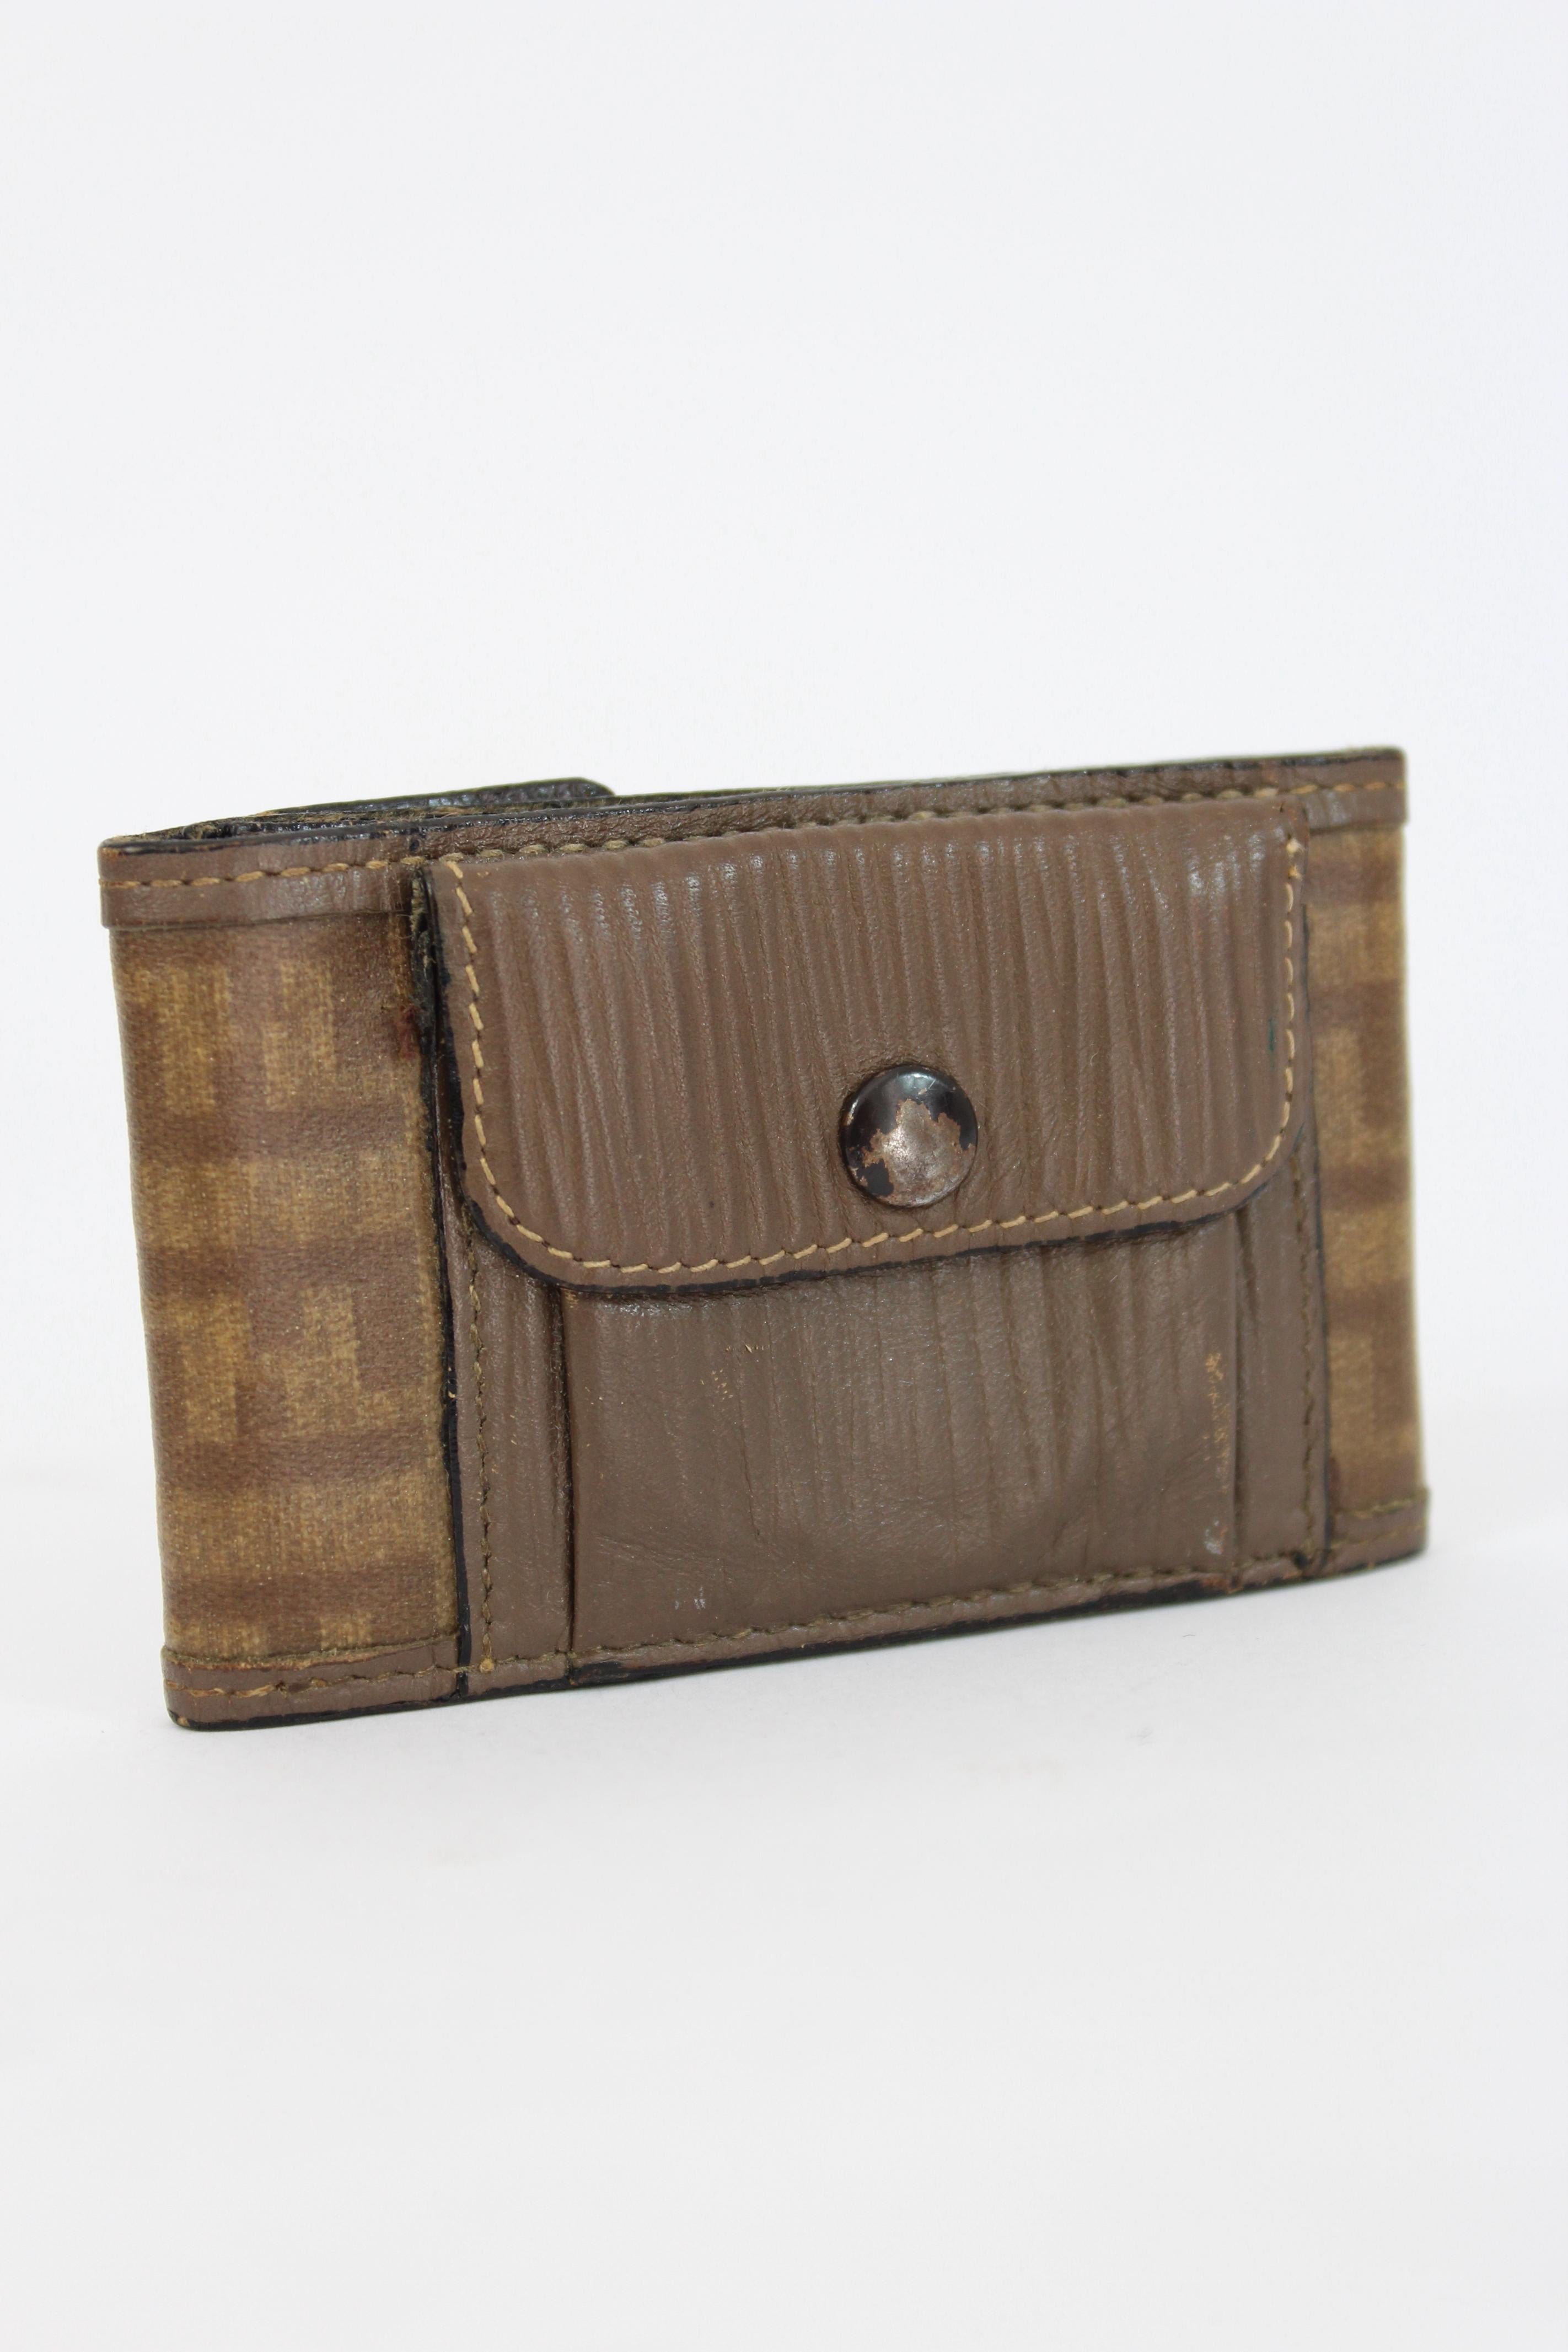 Fendi vintage wallet 70s. Small wallet, with compartment for paper coins and pocket. Monogram pattern in beige and brown color. Fabric, leather and canvas. Closure with clip buttons. Made in Italy.

Condition: Very good

Item in excellent condition.